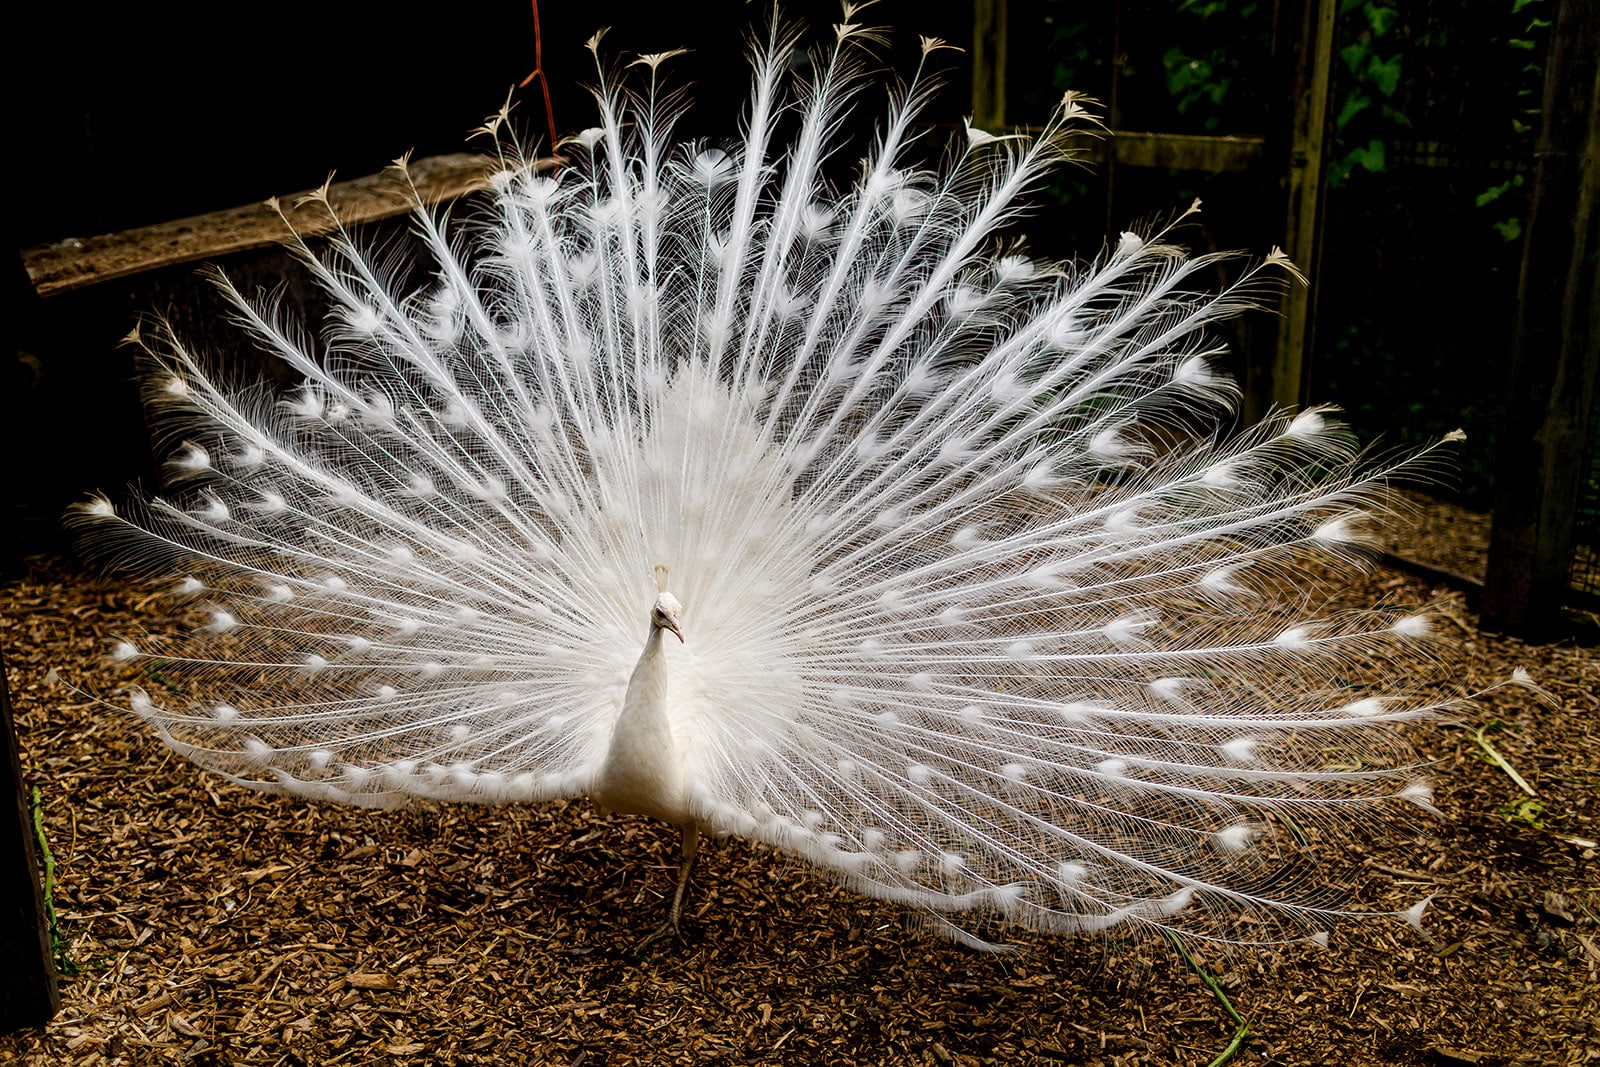 White Peacock at Farm Wedding Venue displaying his tail feathers 